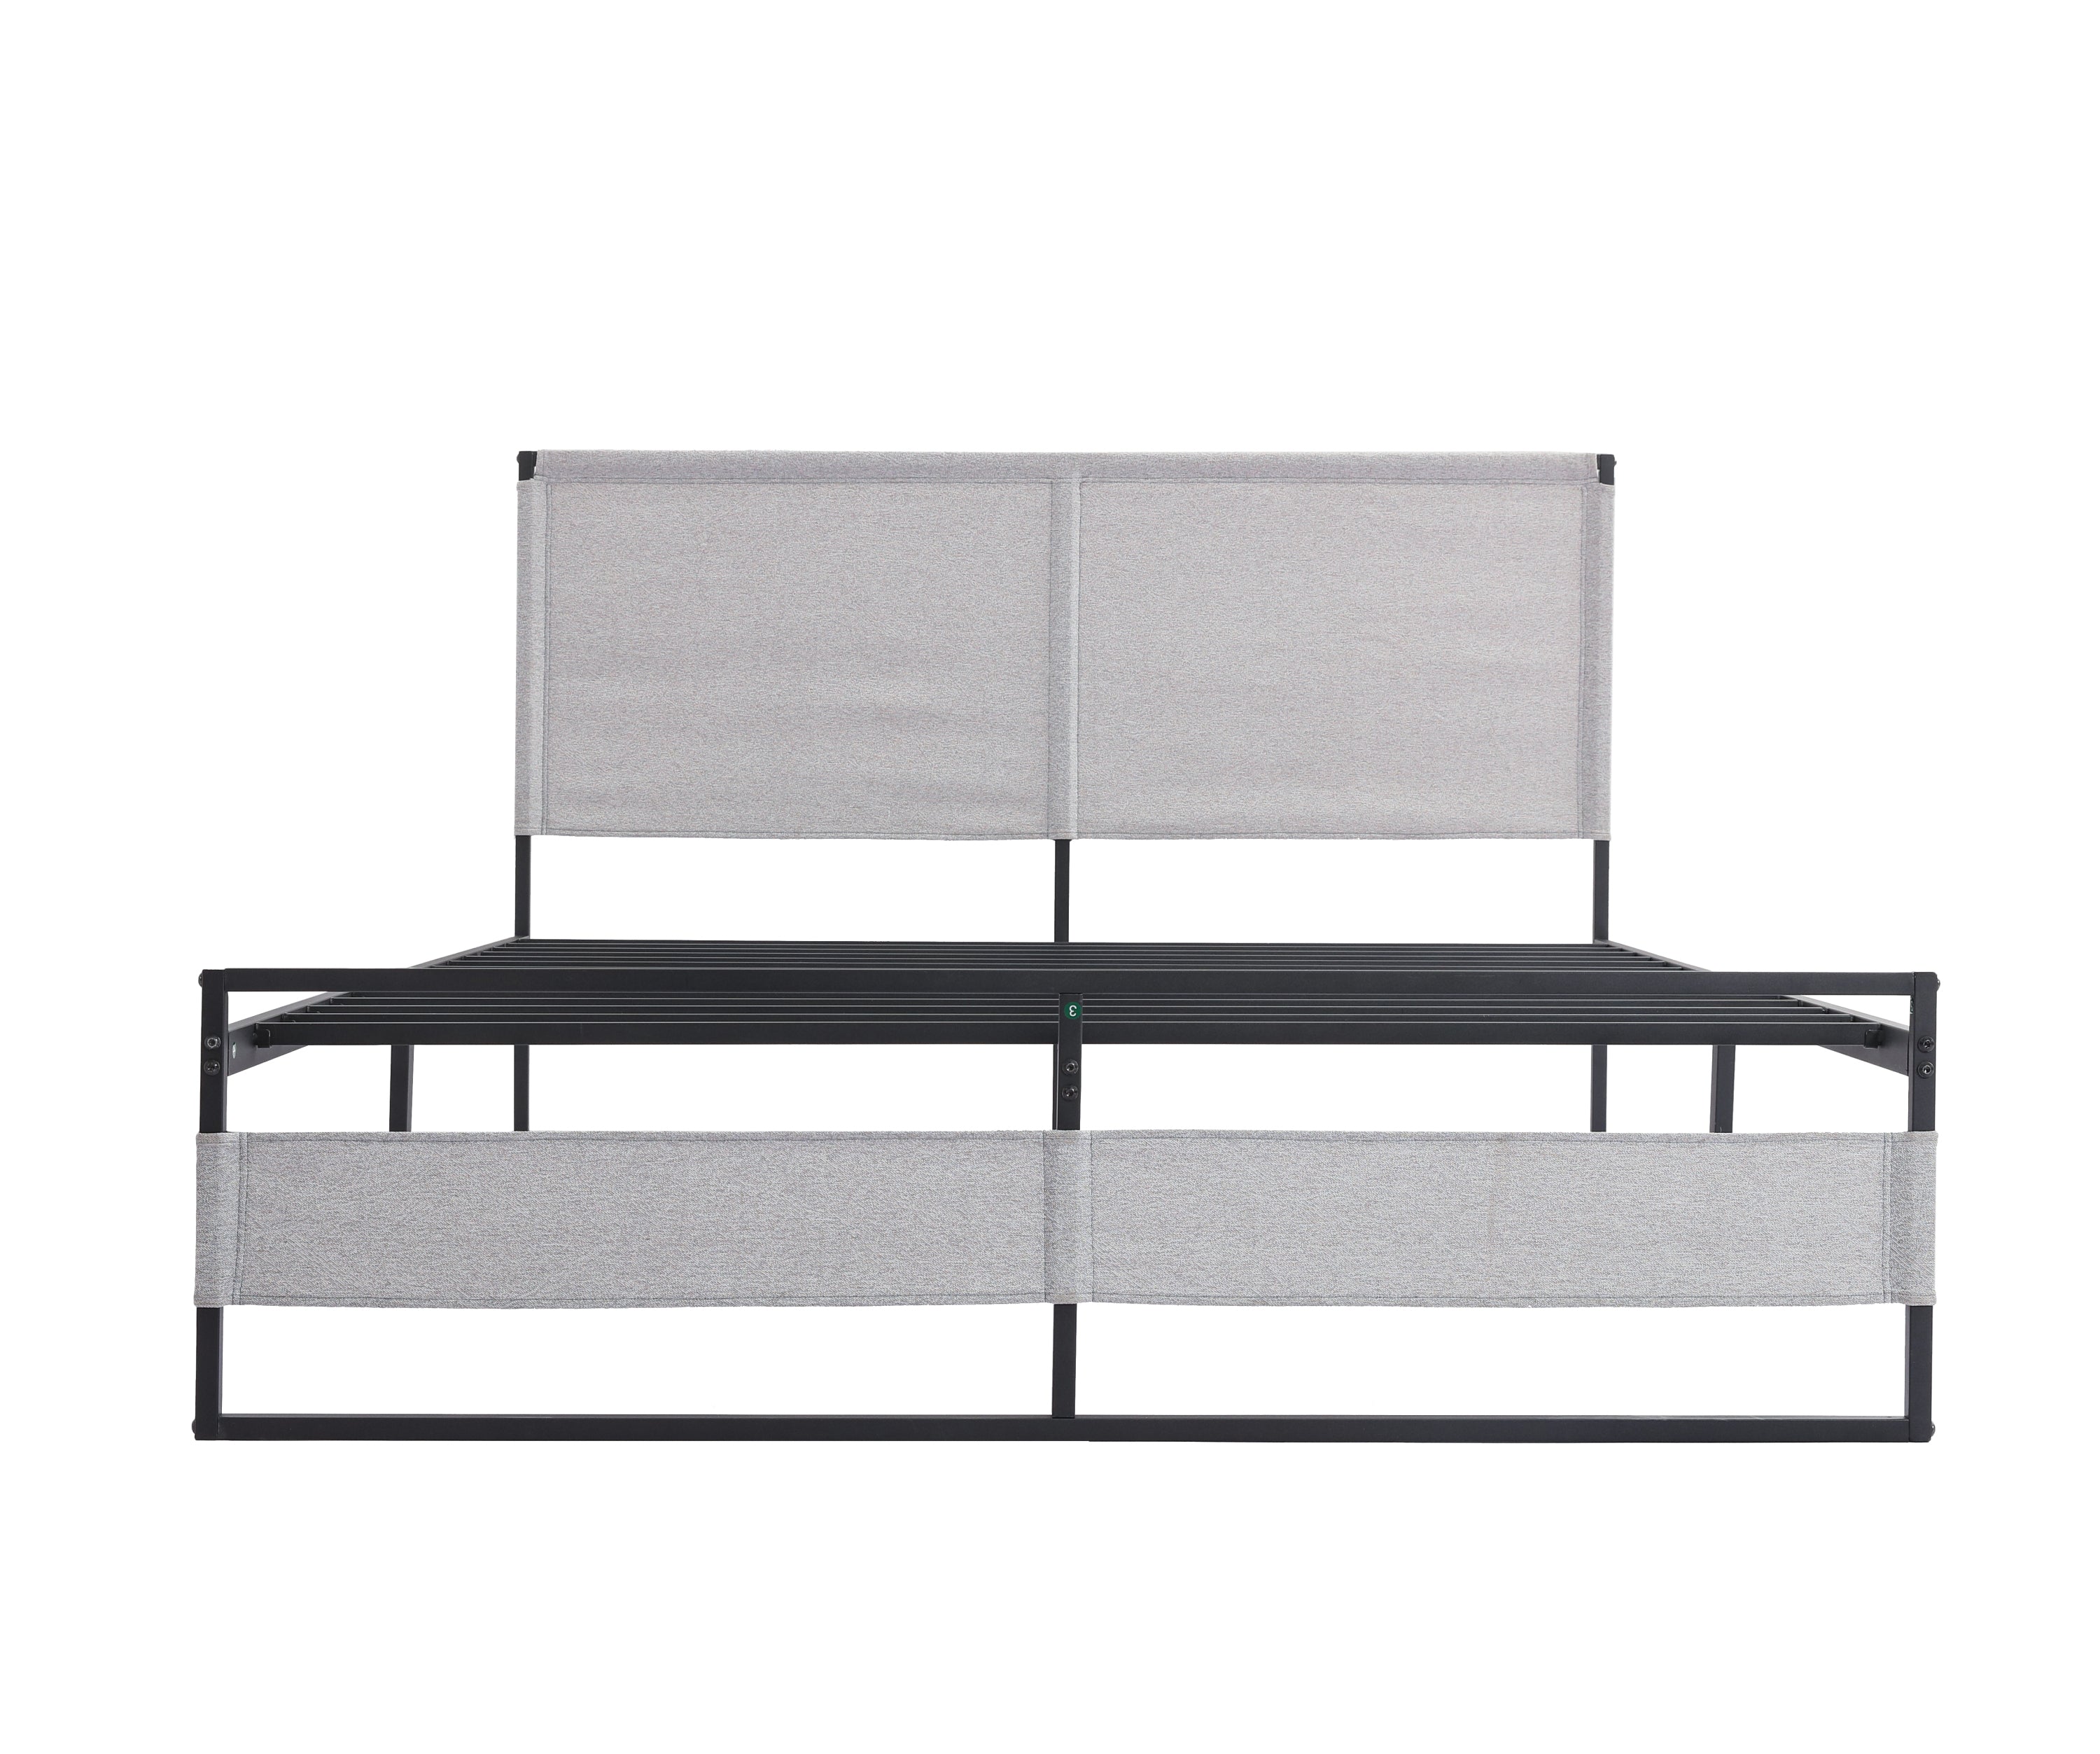 V4 Metal Bed Frame 14 Inch Queen Size with Headboard and Footboard, Mattress Platform with 12 Inch Storage Space